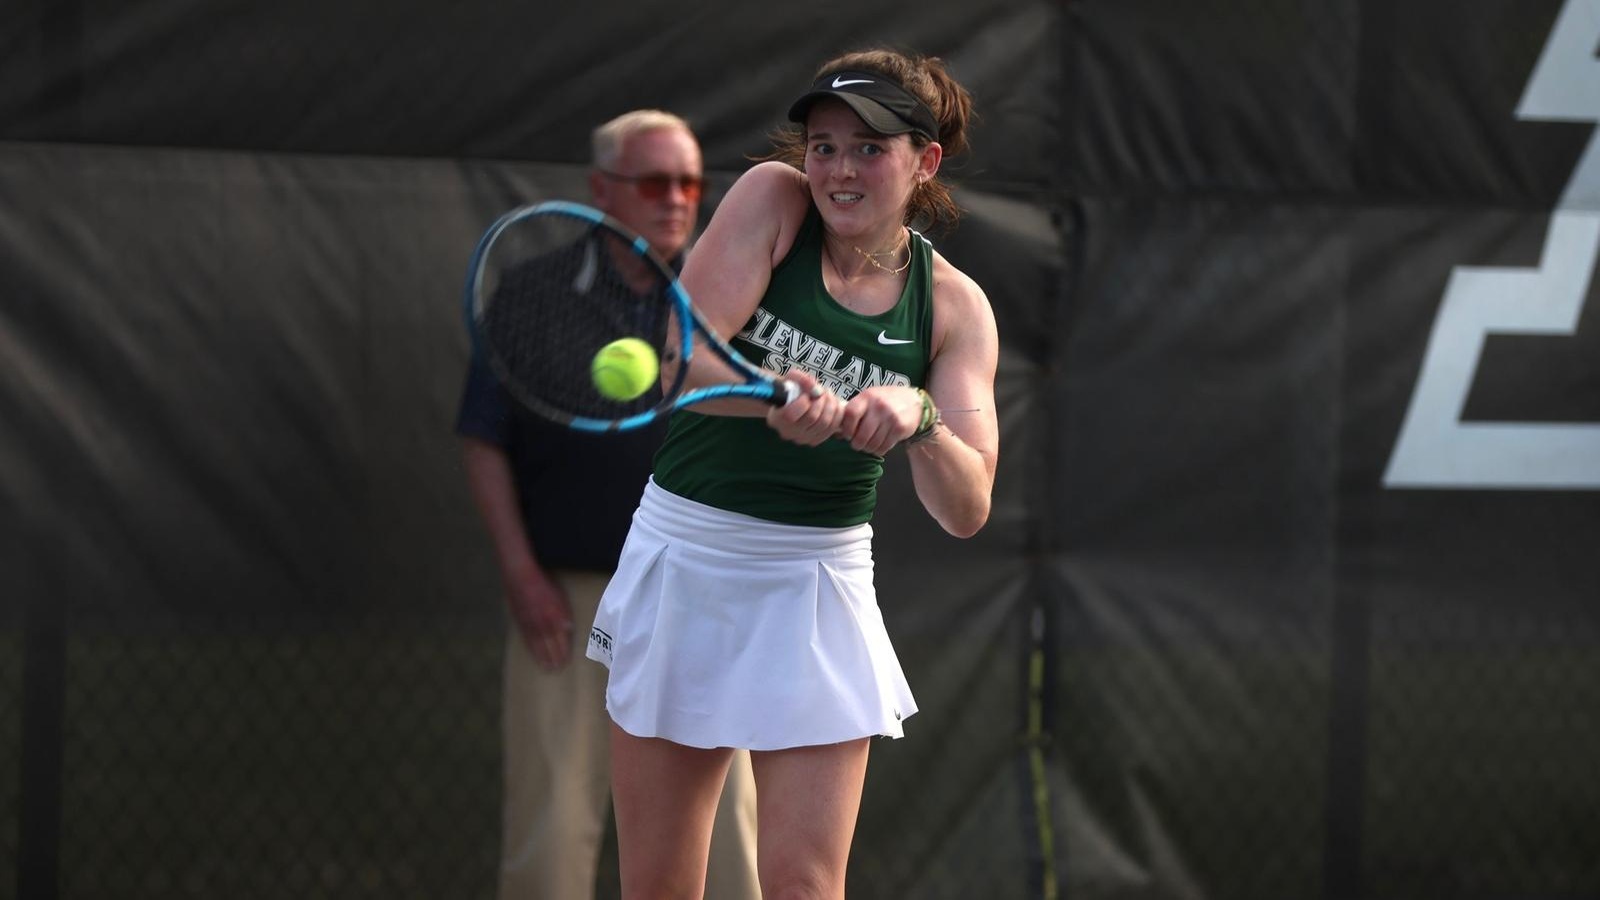 Cleveland State Women’s Tennis Headed To #HLTennis Championship Match